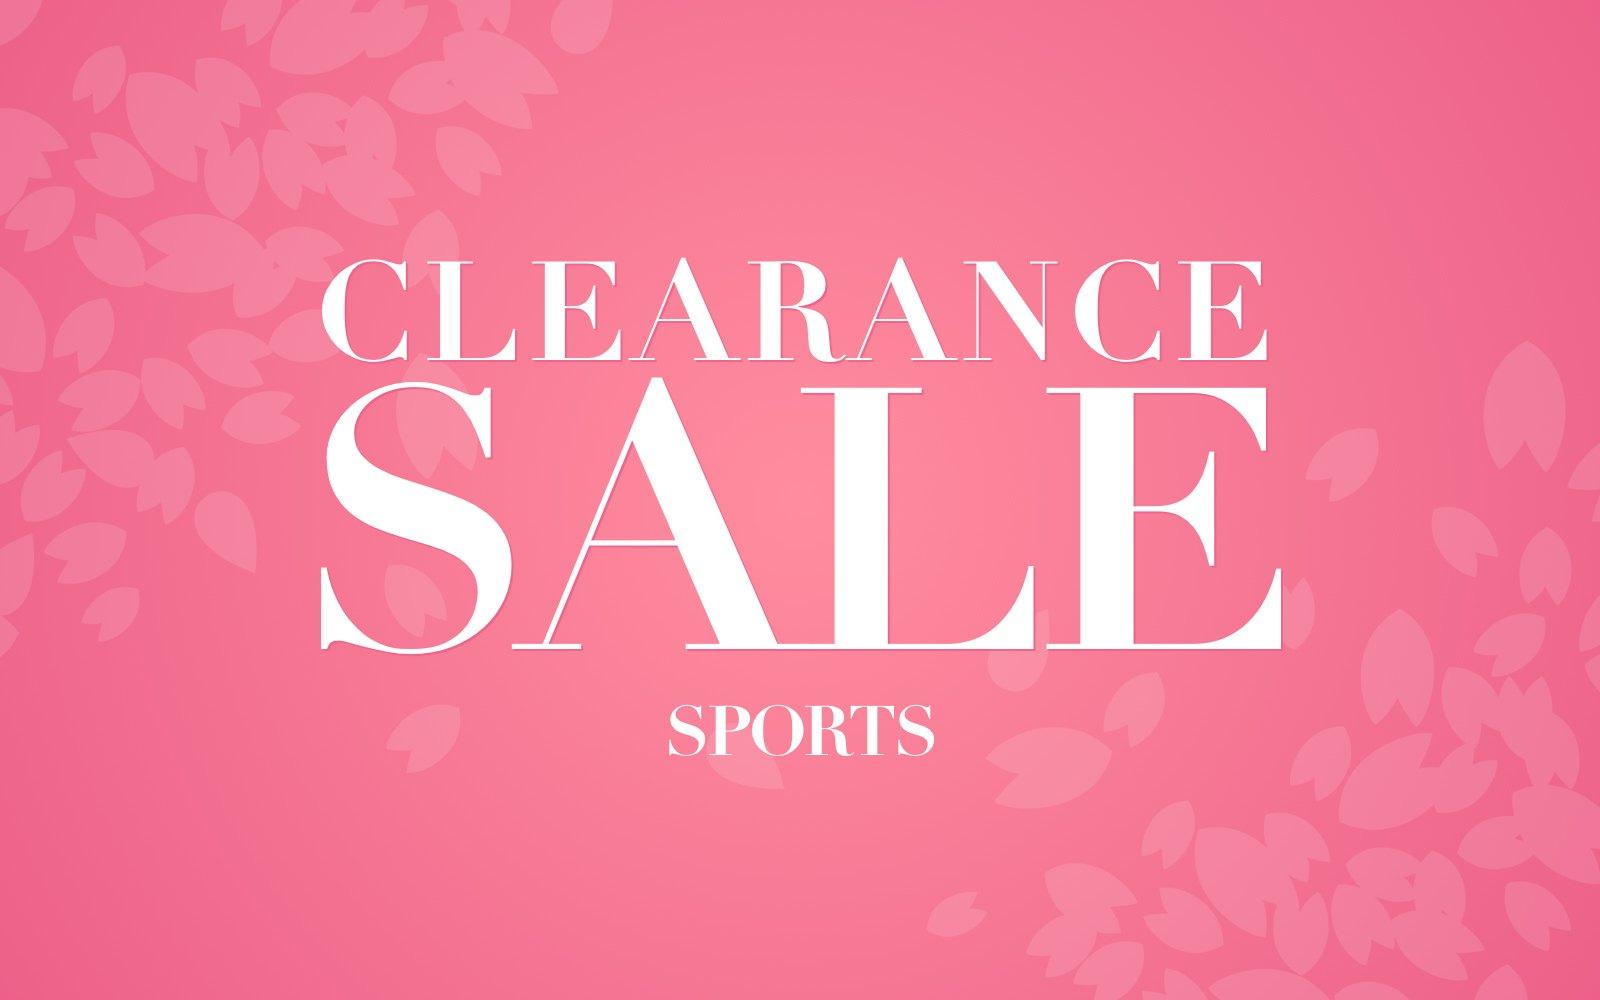 Clearance Sports